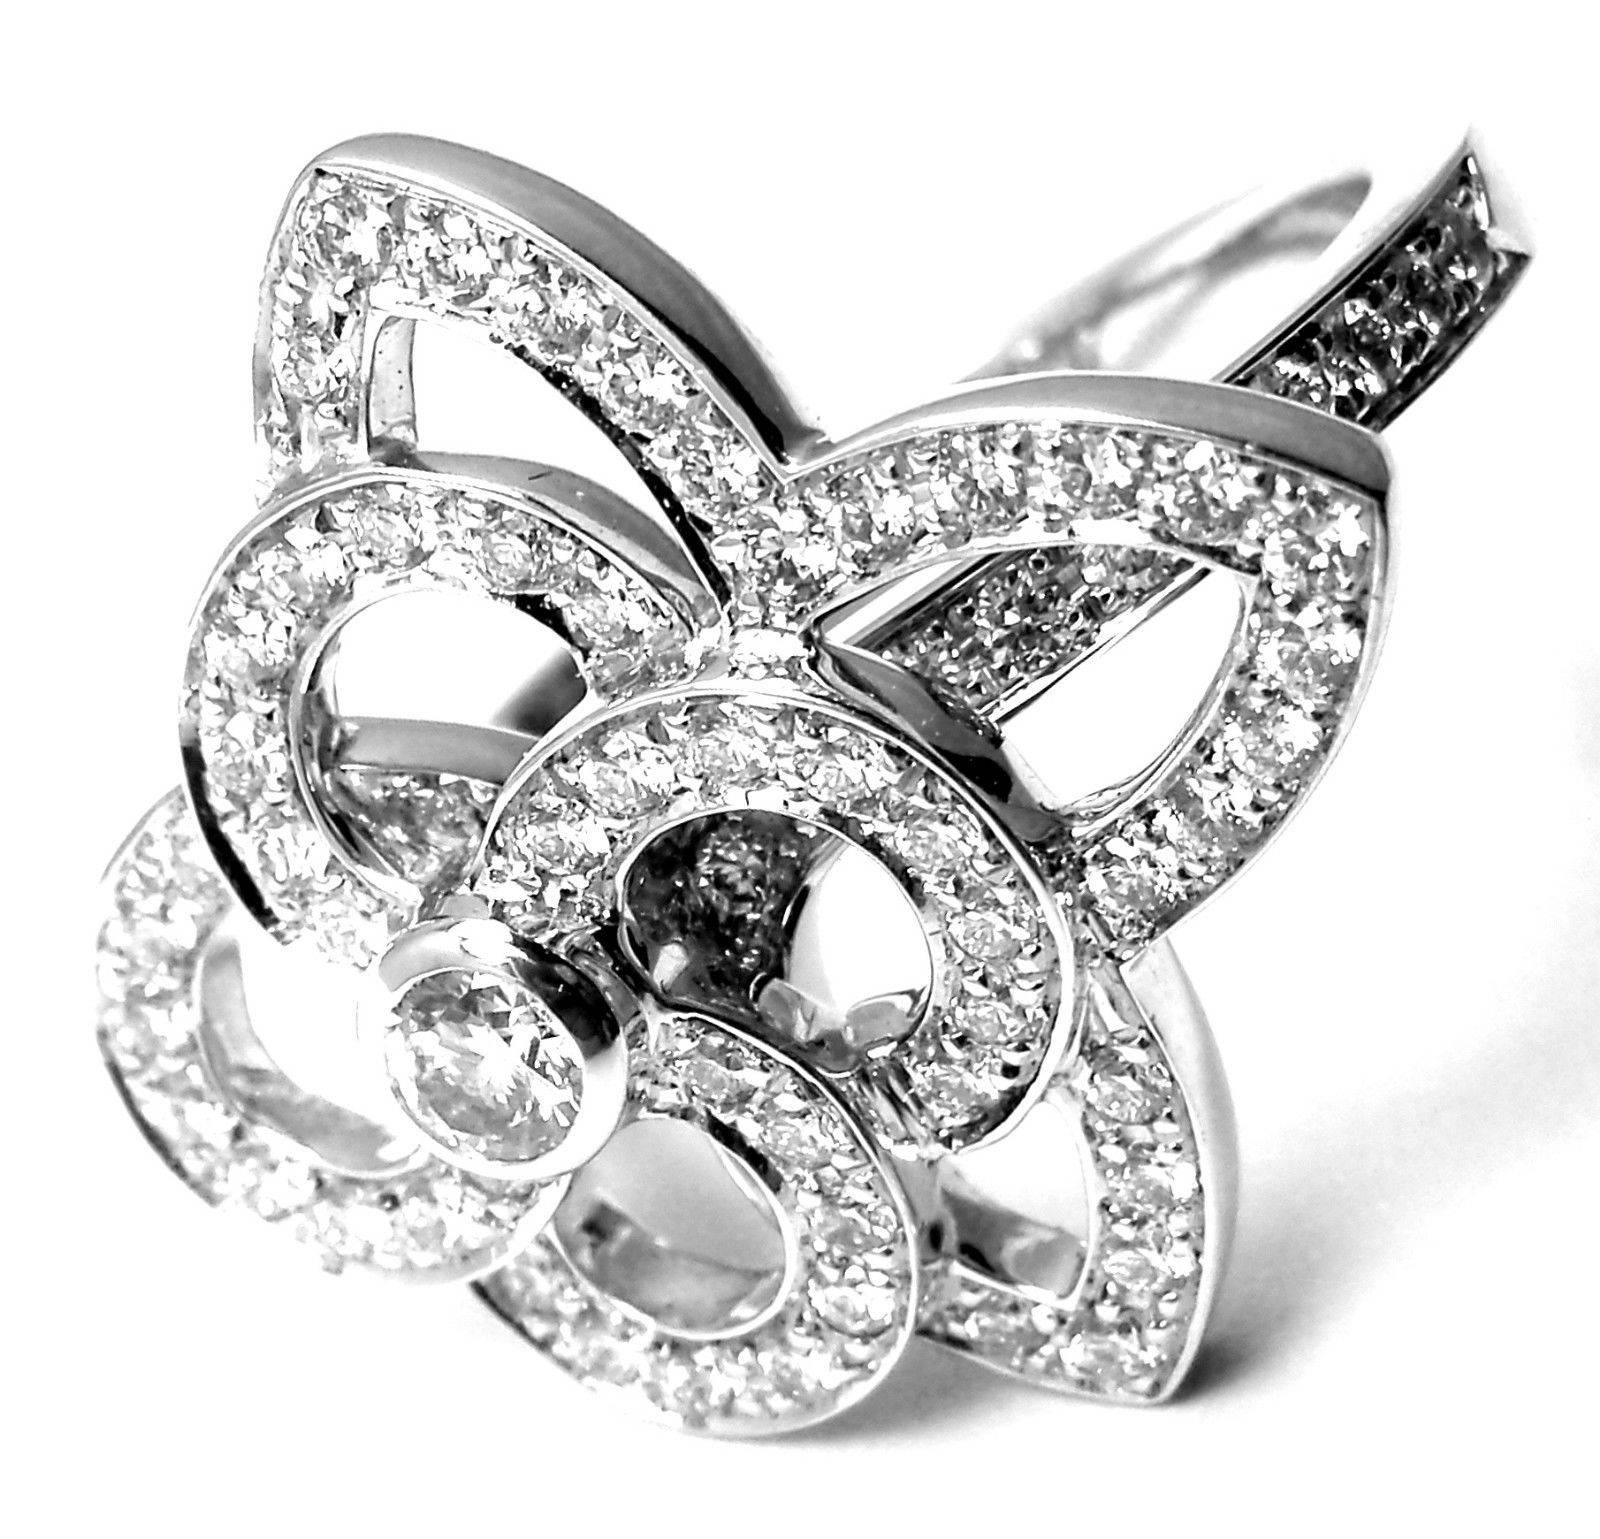 18k White Gold Diamond Flower Ring by Louis Vuitton. 
With round brilliant cut diamond VS1 clarity, E color total weight approx. .96ct
This ring comes with certificate and a pouch.

Details: 
Ring Size: 5 1/4 European 50
Width: 21mm
Weight: